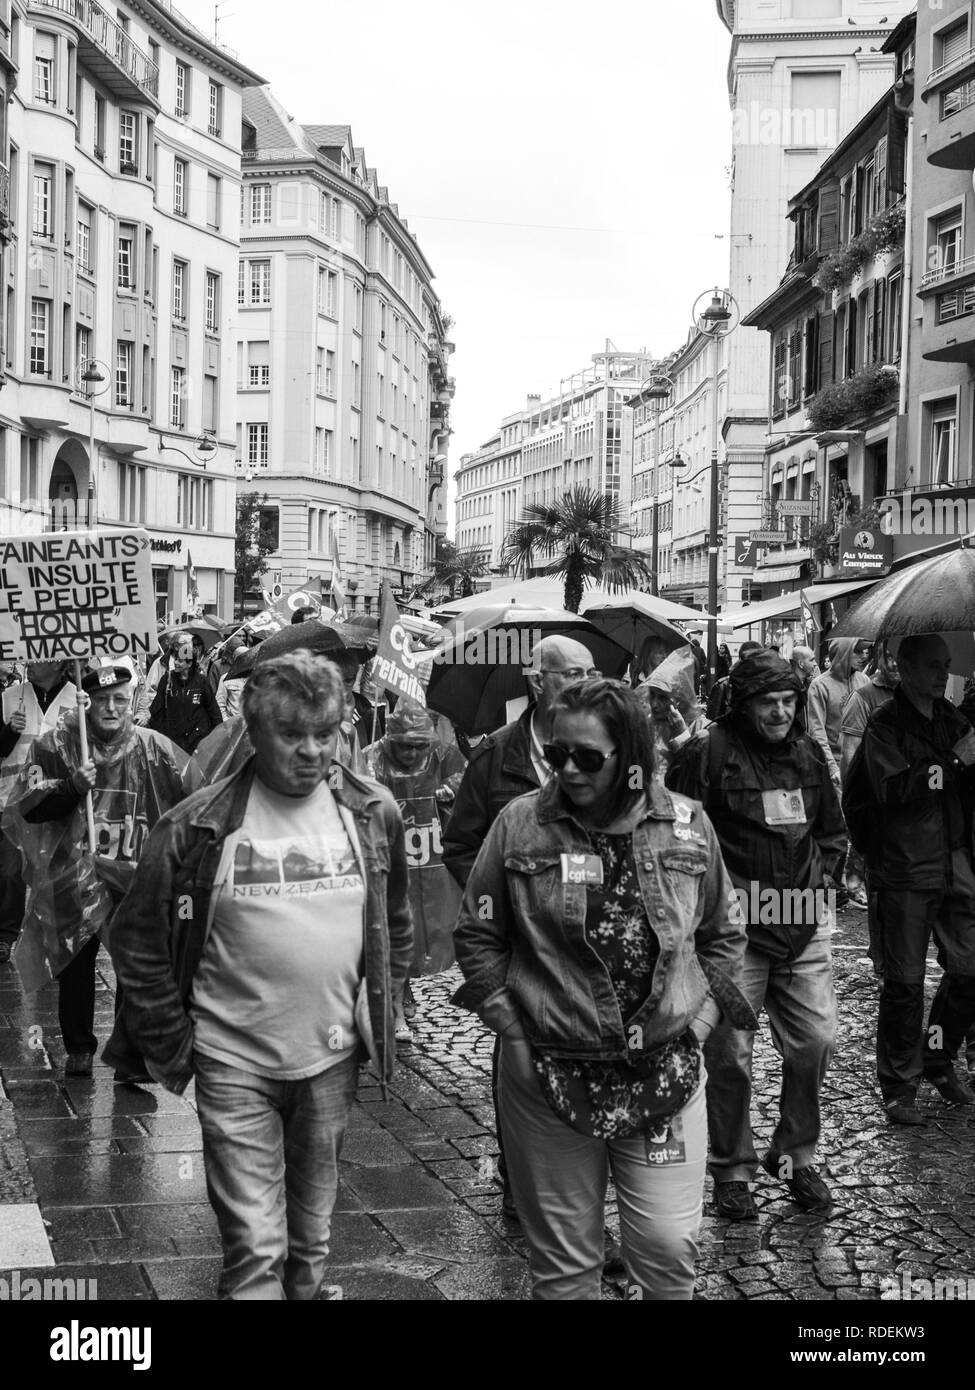 STRASBOURG, FRANCE - SEP 12, 2018: People marching under rain during a French Nationwide day of protest against labor reform proposed by Emmanuel Macron Government black and white  Stock Photo